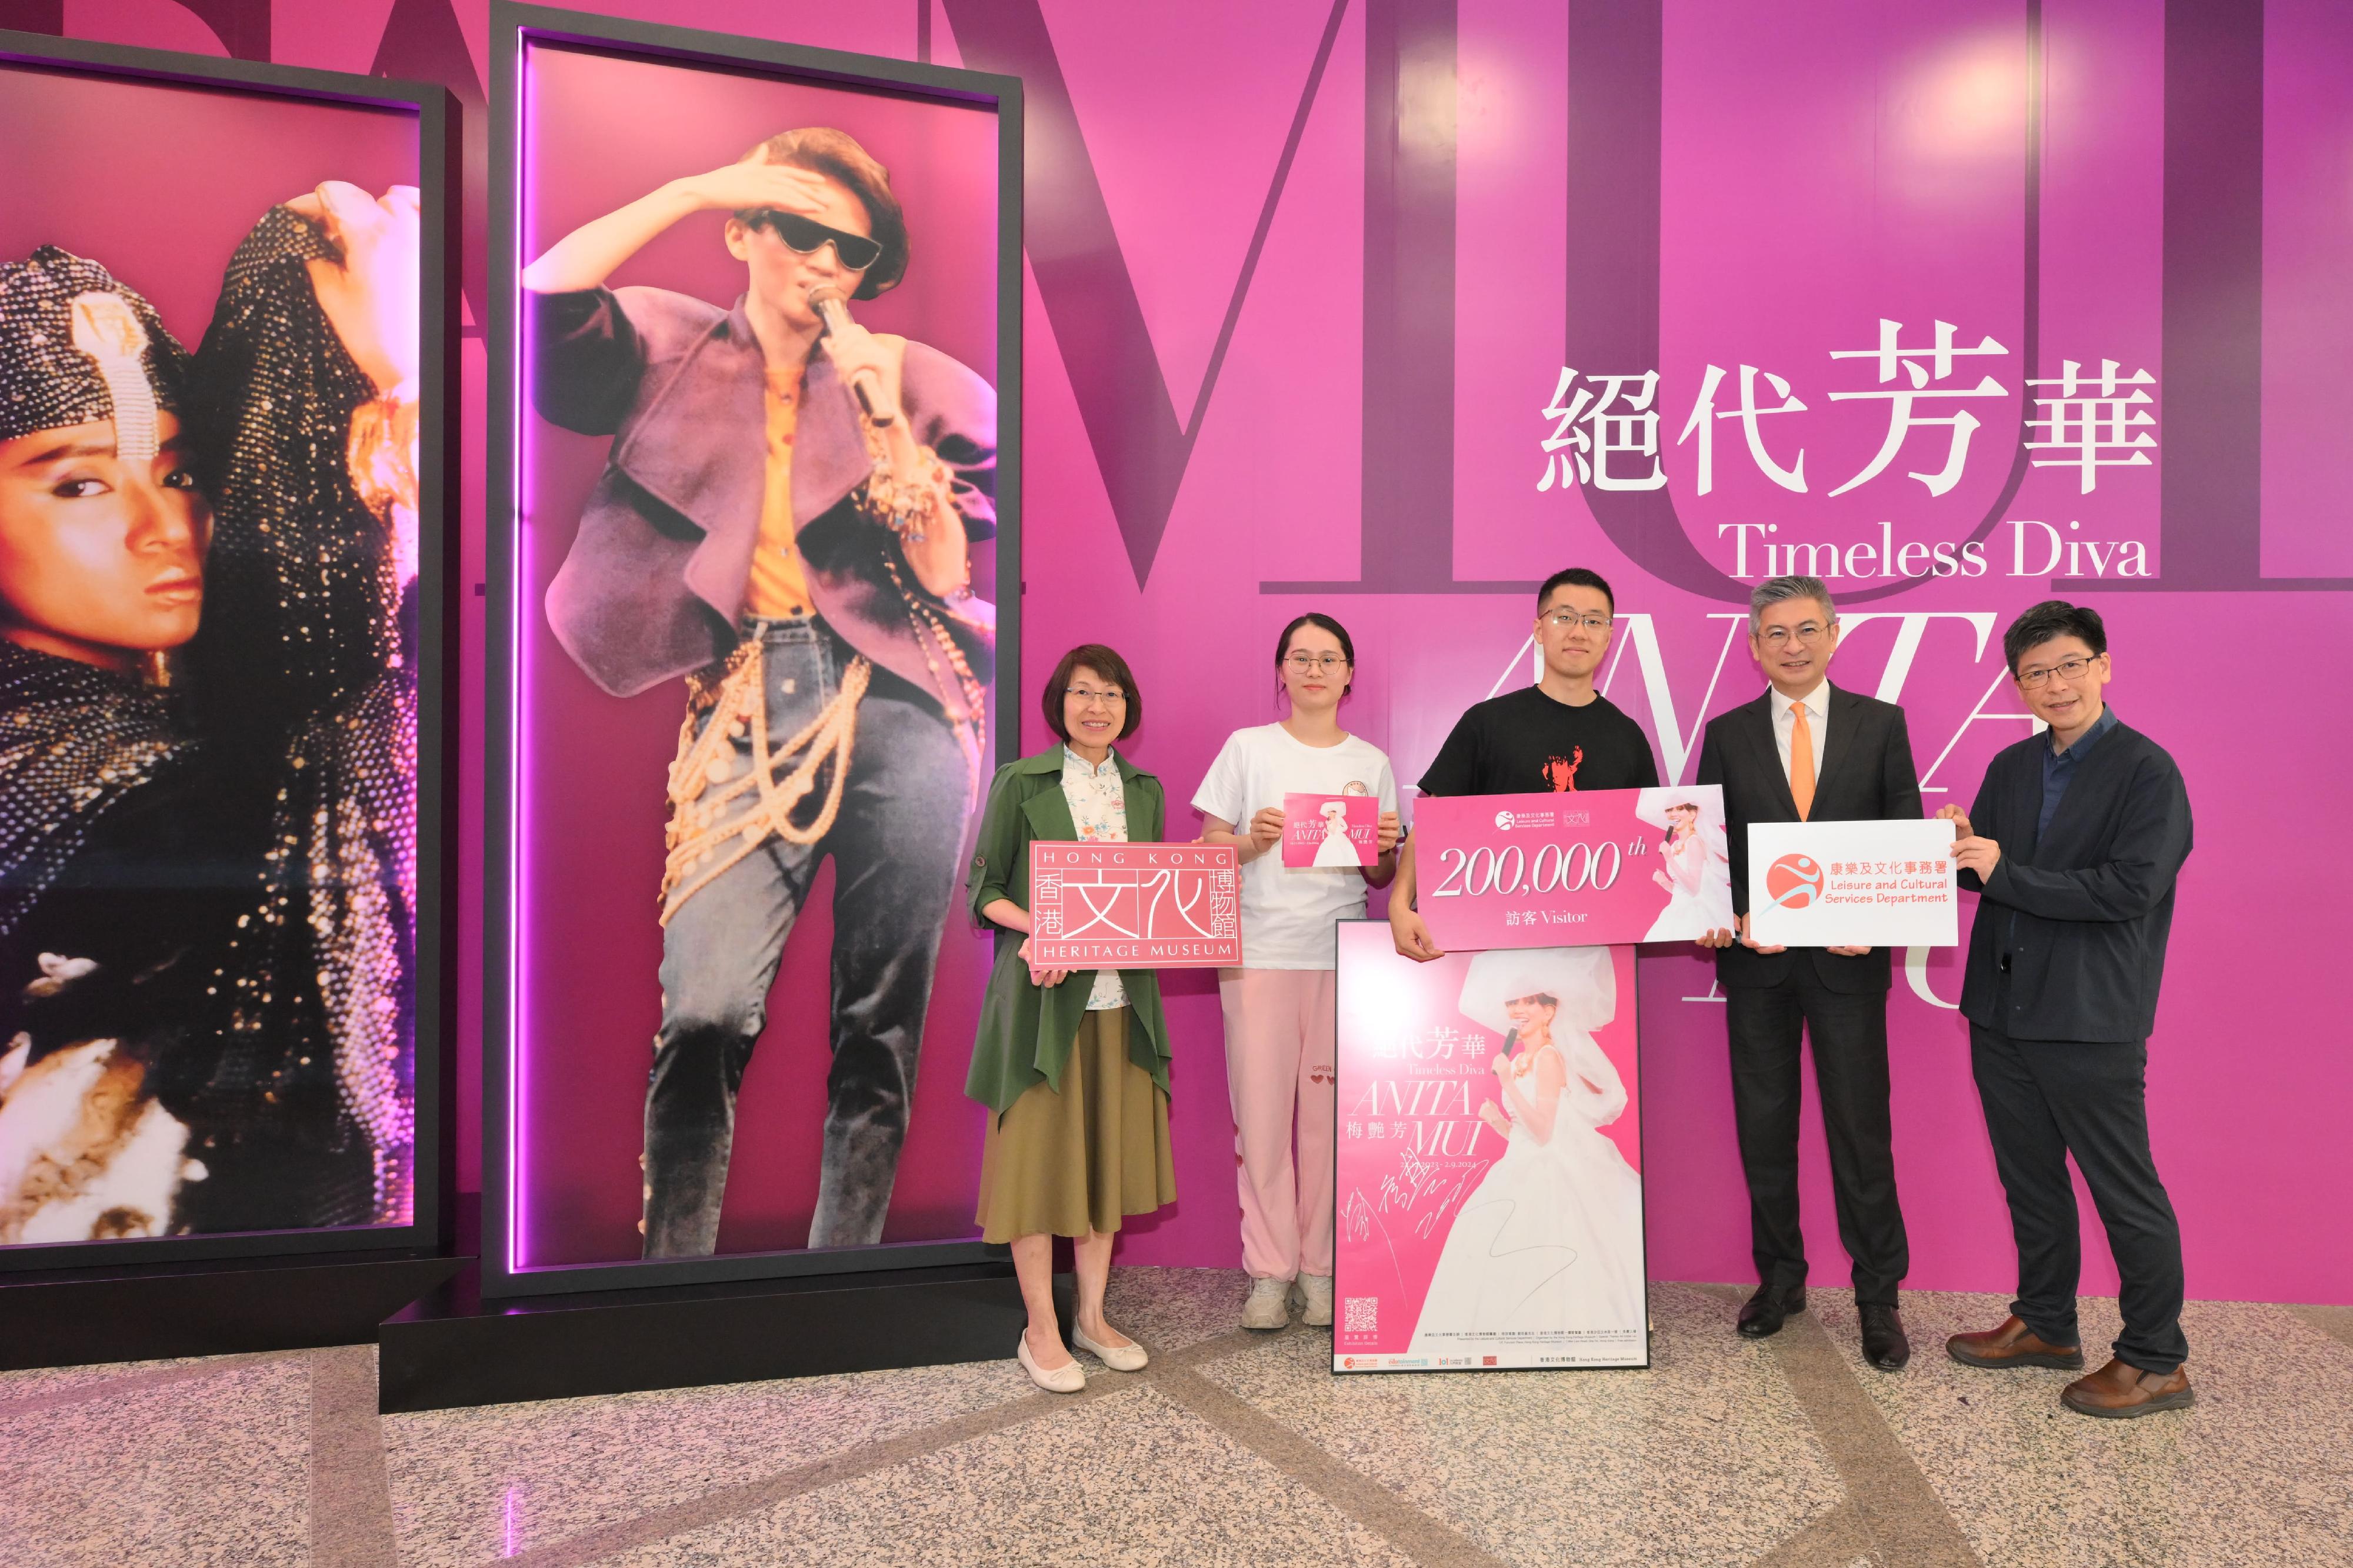 The "Timeless Diva: Anita Mui" exhibition at the Hong Kong Heritage Museum (HKHM) has been widely welcomed by the local public and visitors. It has reached 200 000 visitors from its opening on December 24 last year to today (May 2). Photo shows the Under Secretary for Culture, Sports and Tourism, Mr Raistlin Lau (second right); the Assistant Director (Heritage and Museums) of the Leisure and Cultural Services Department, Ms Esa Leung (first left); and the Acting Museum Director of the HKHM, Dr Raymond Tang (first right), welcoming the 200 000th visitor of the exhibition and presenting a gift pack.